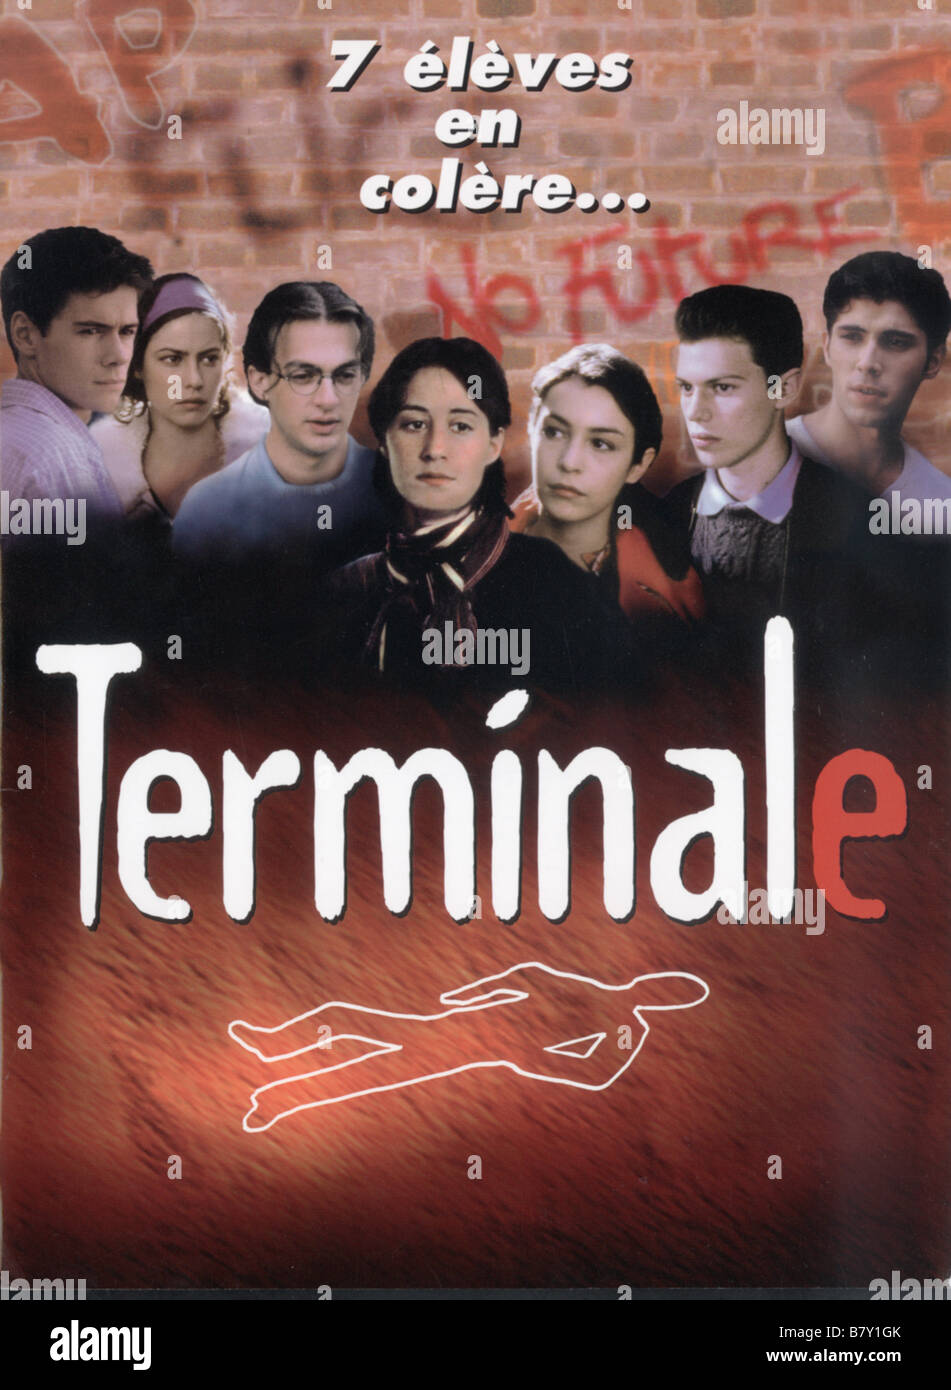 Terminale  Year: 1998 - France Adrienne Pauly, Eléonore Gosset, Mathieu Crépeau, Loïc Corbery, Alexandre Chacon, Anna Mouglalis, David Geselson affiche, poster  Director: Francis Girod Stock Photo